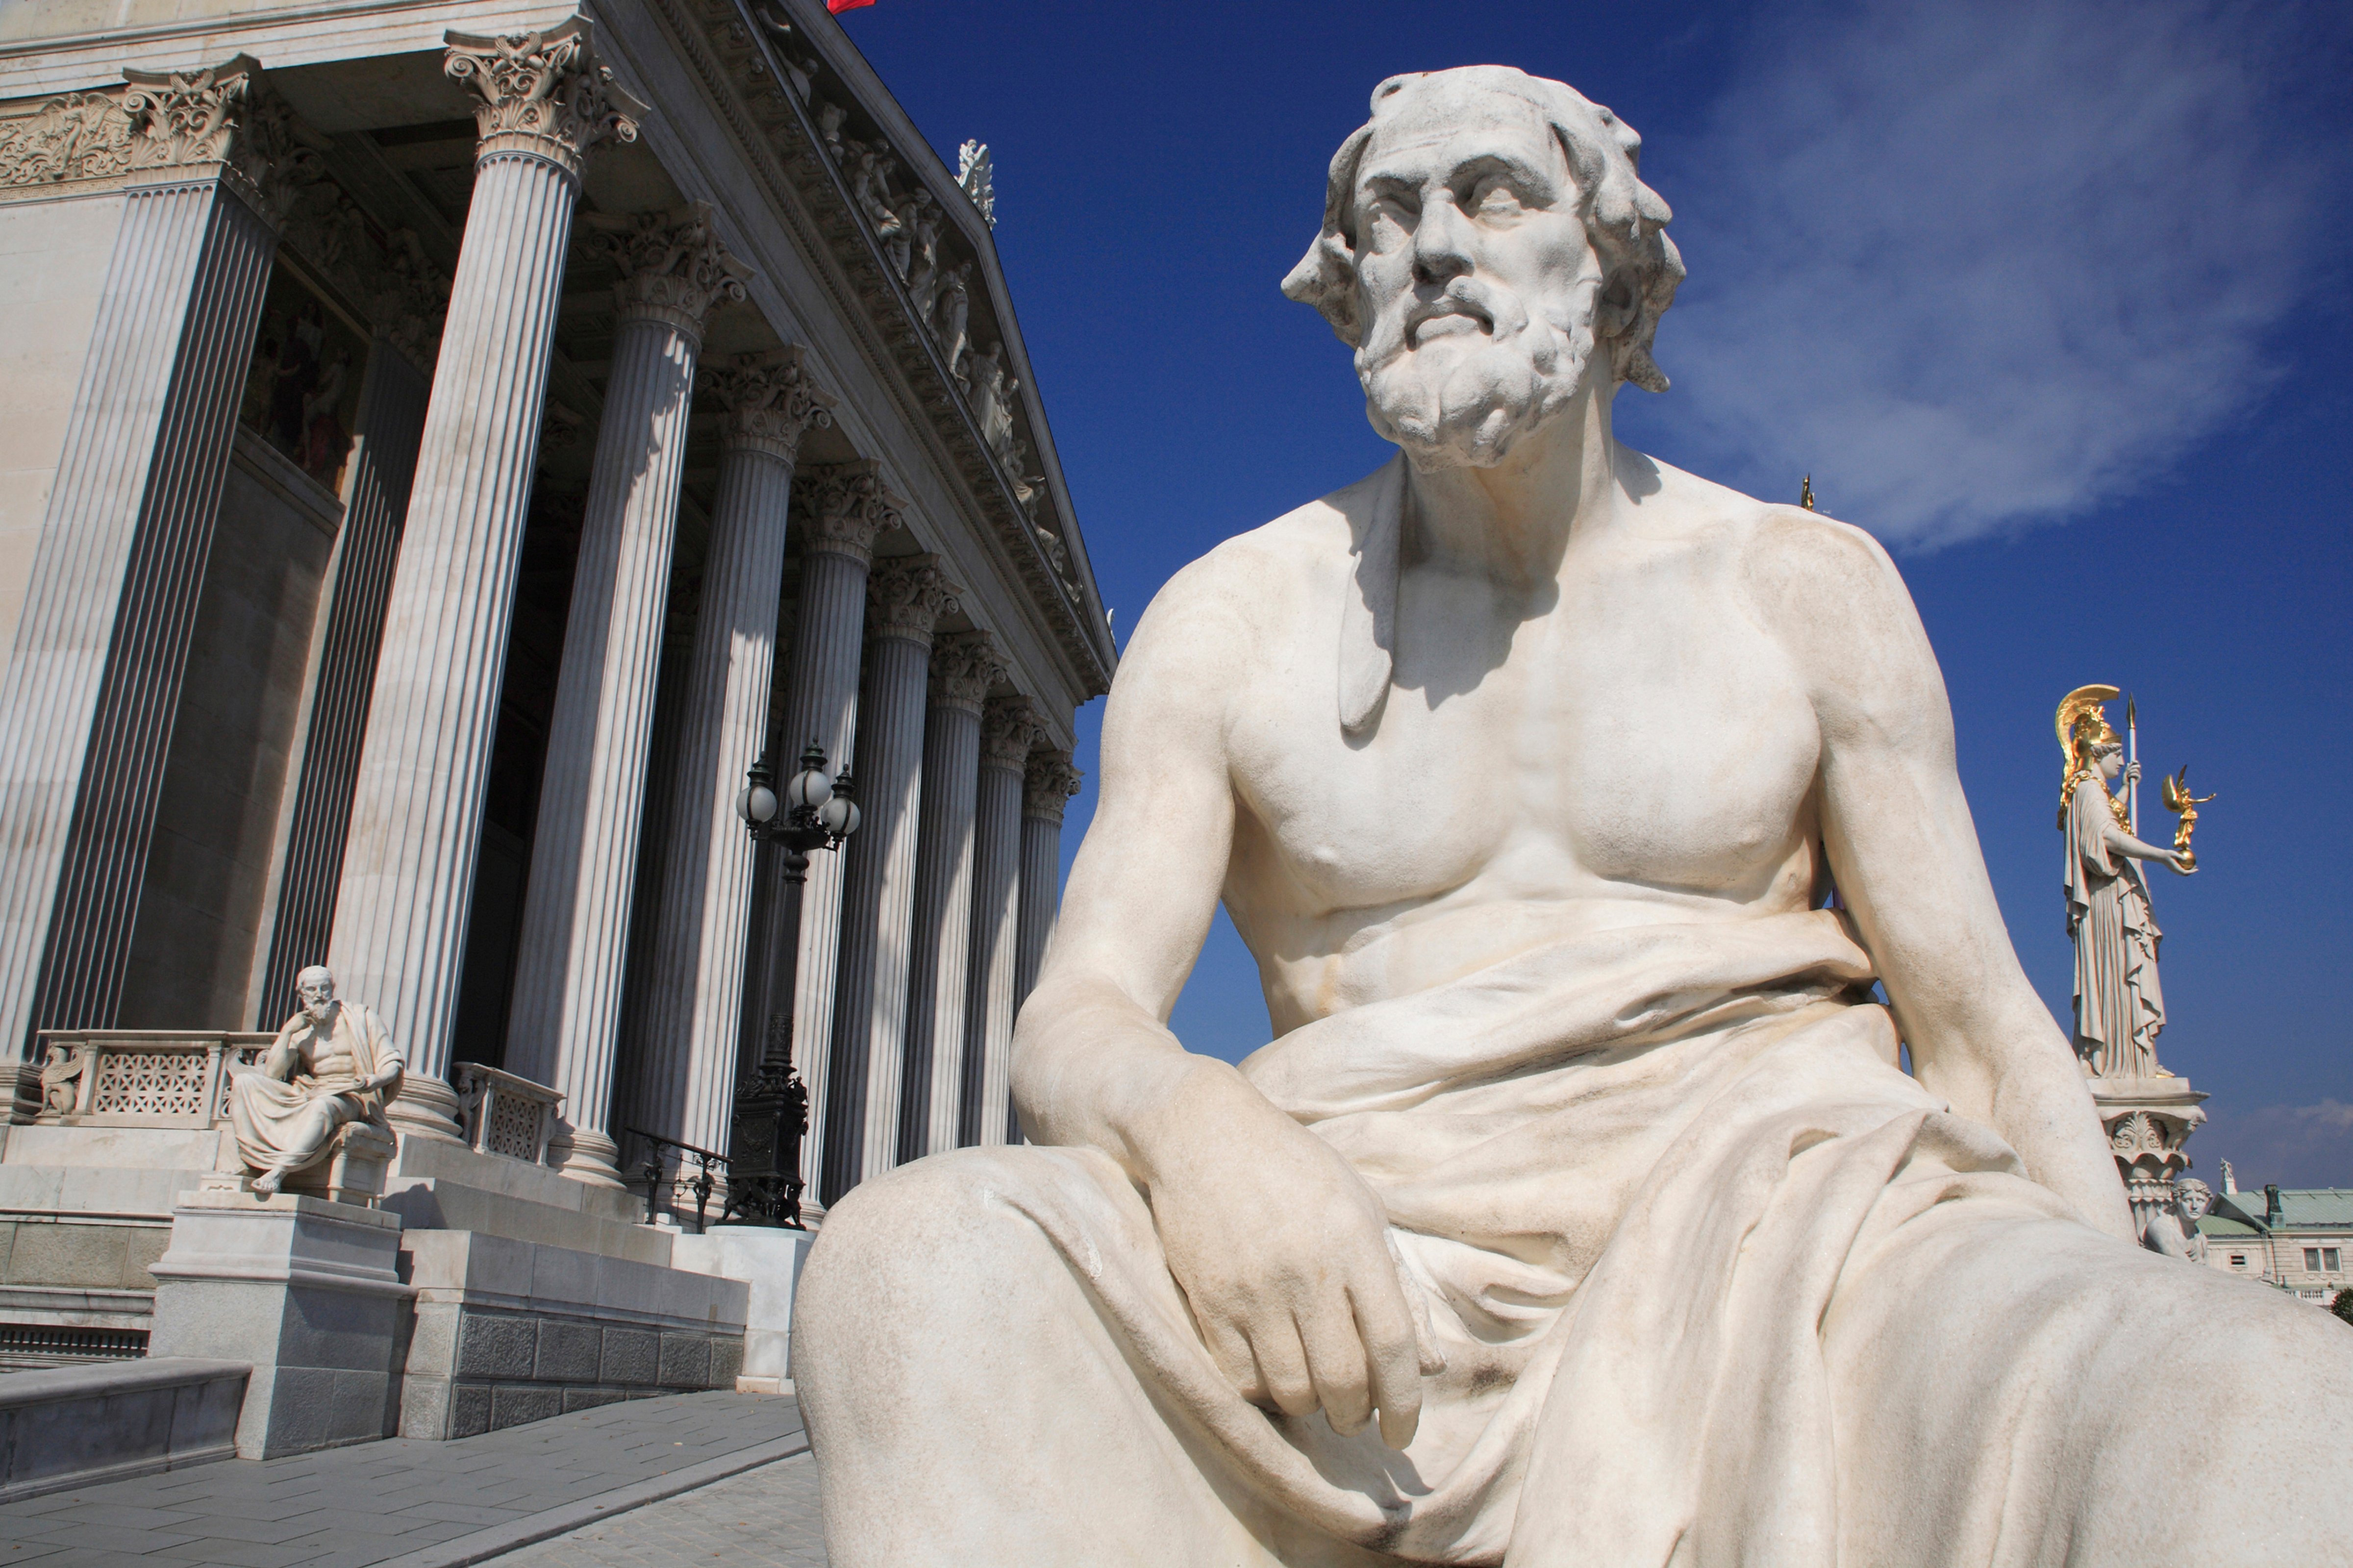 Statue of Thucydides the Greek philosopher in front of Parliament building